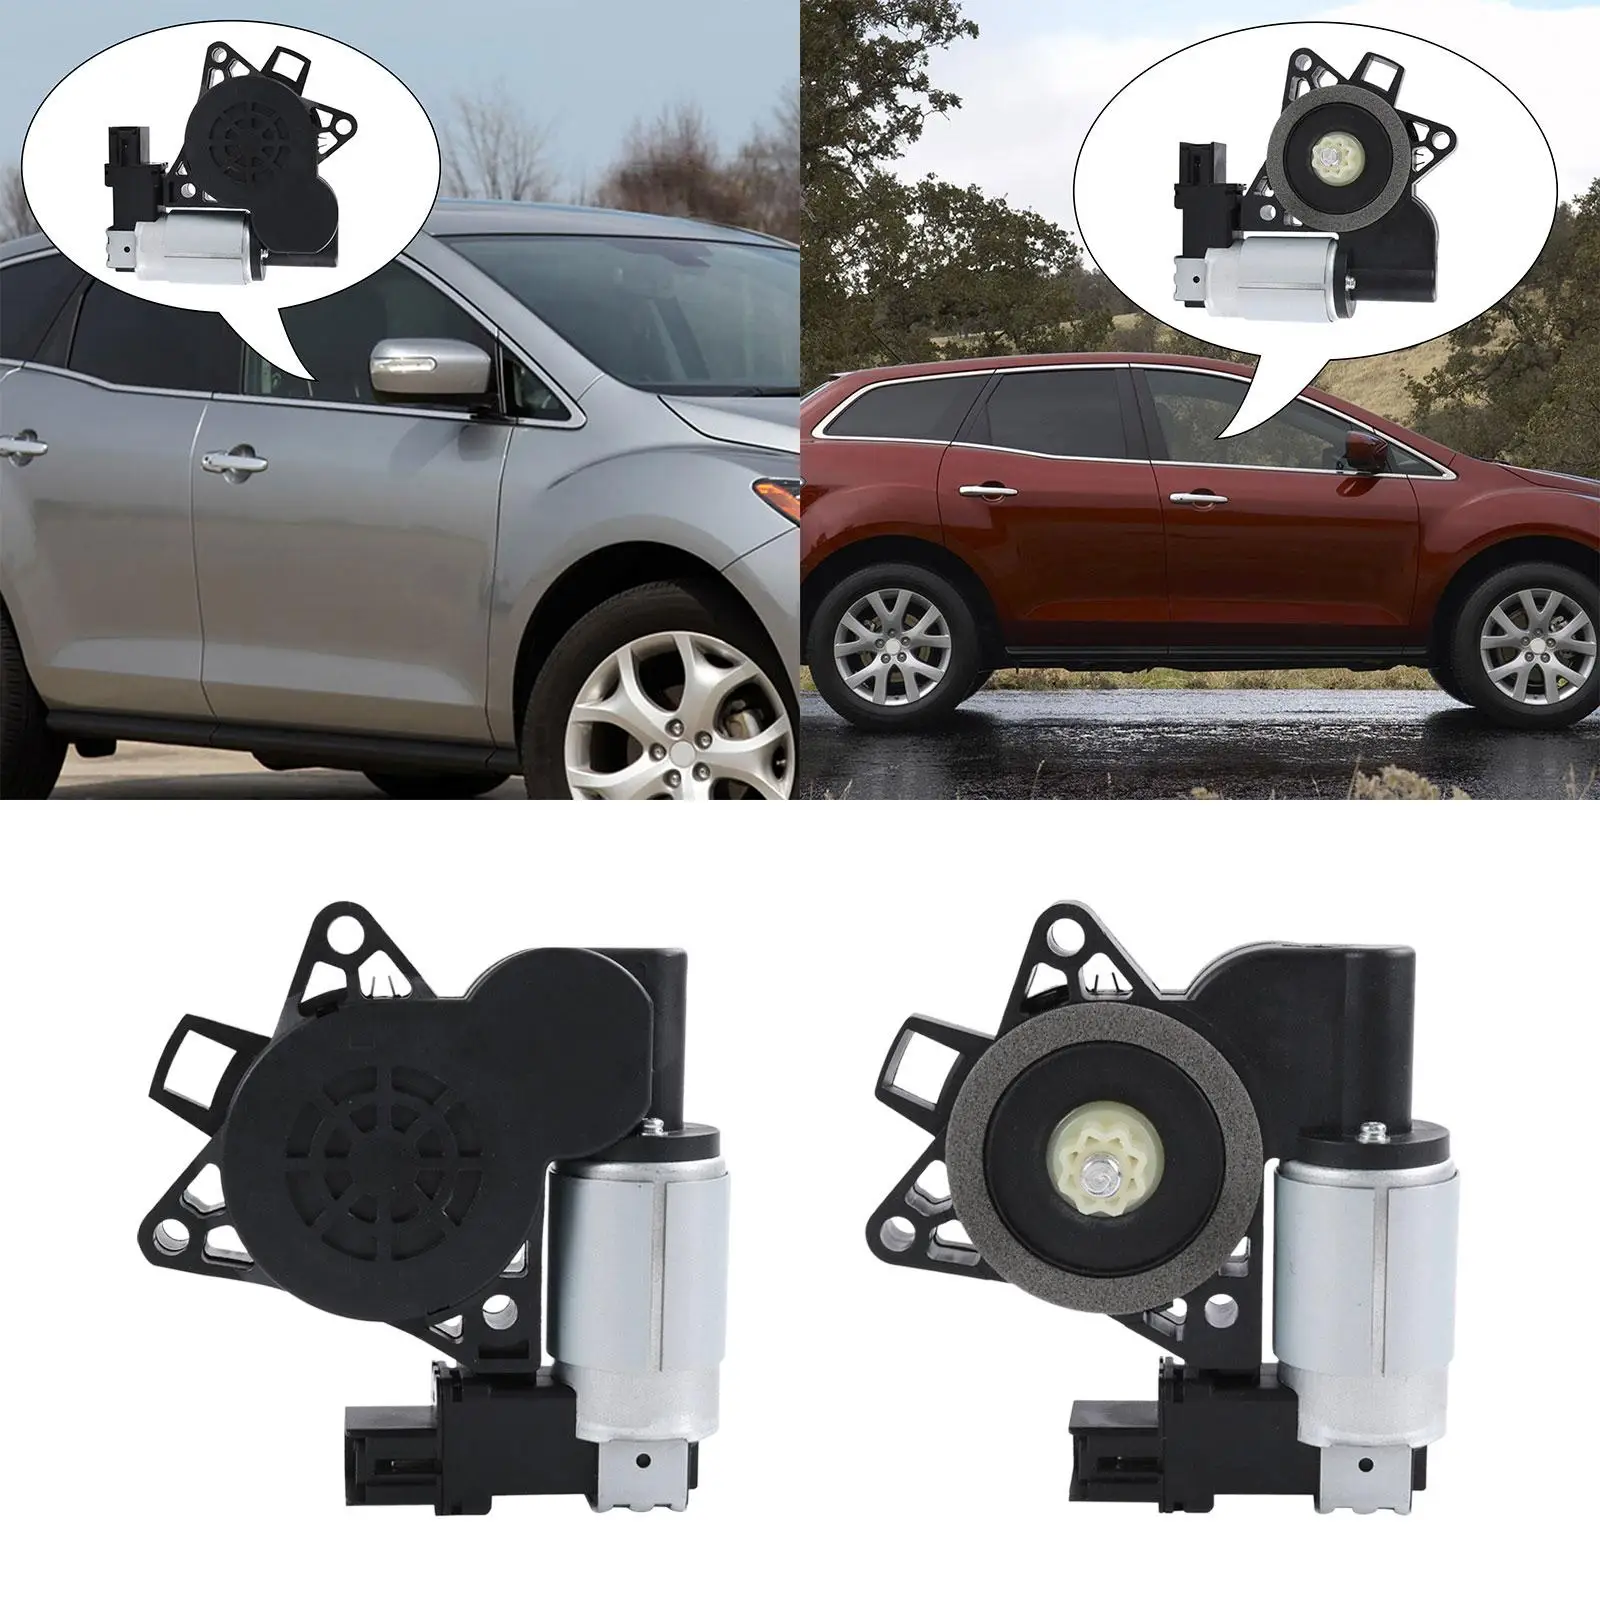 Power Window Lifter Motor Practical Replacements for Mazda RX-8 6